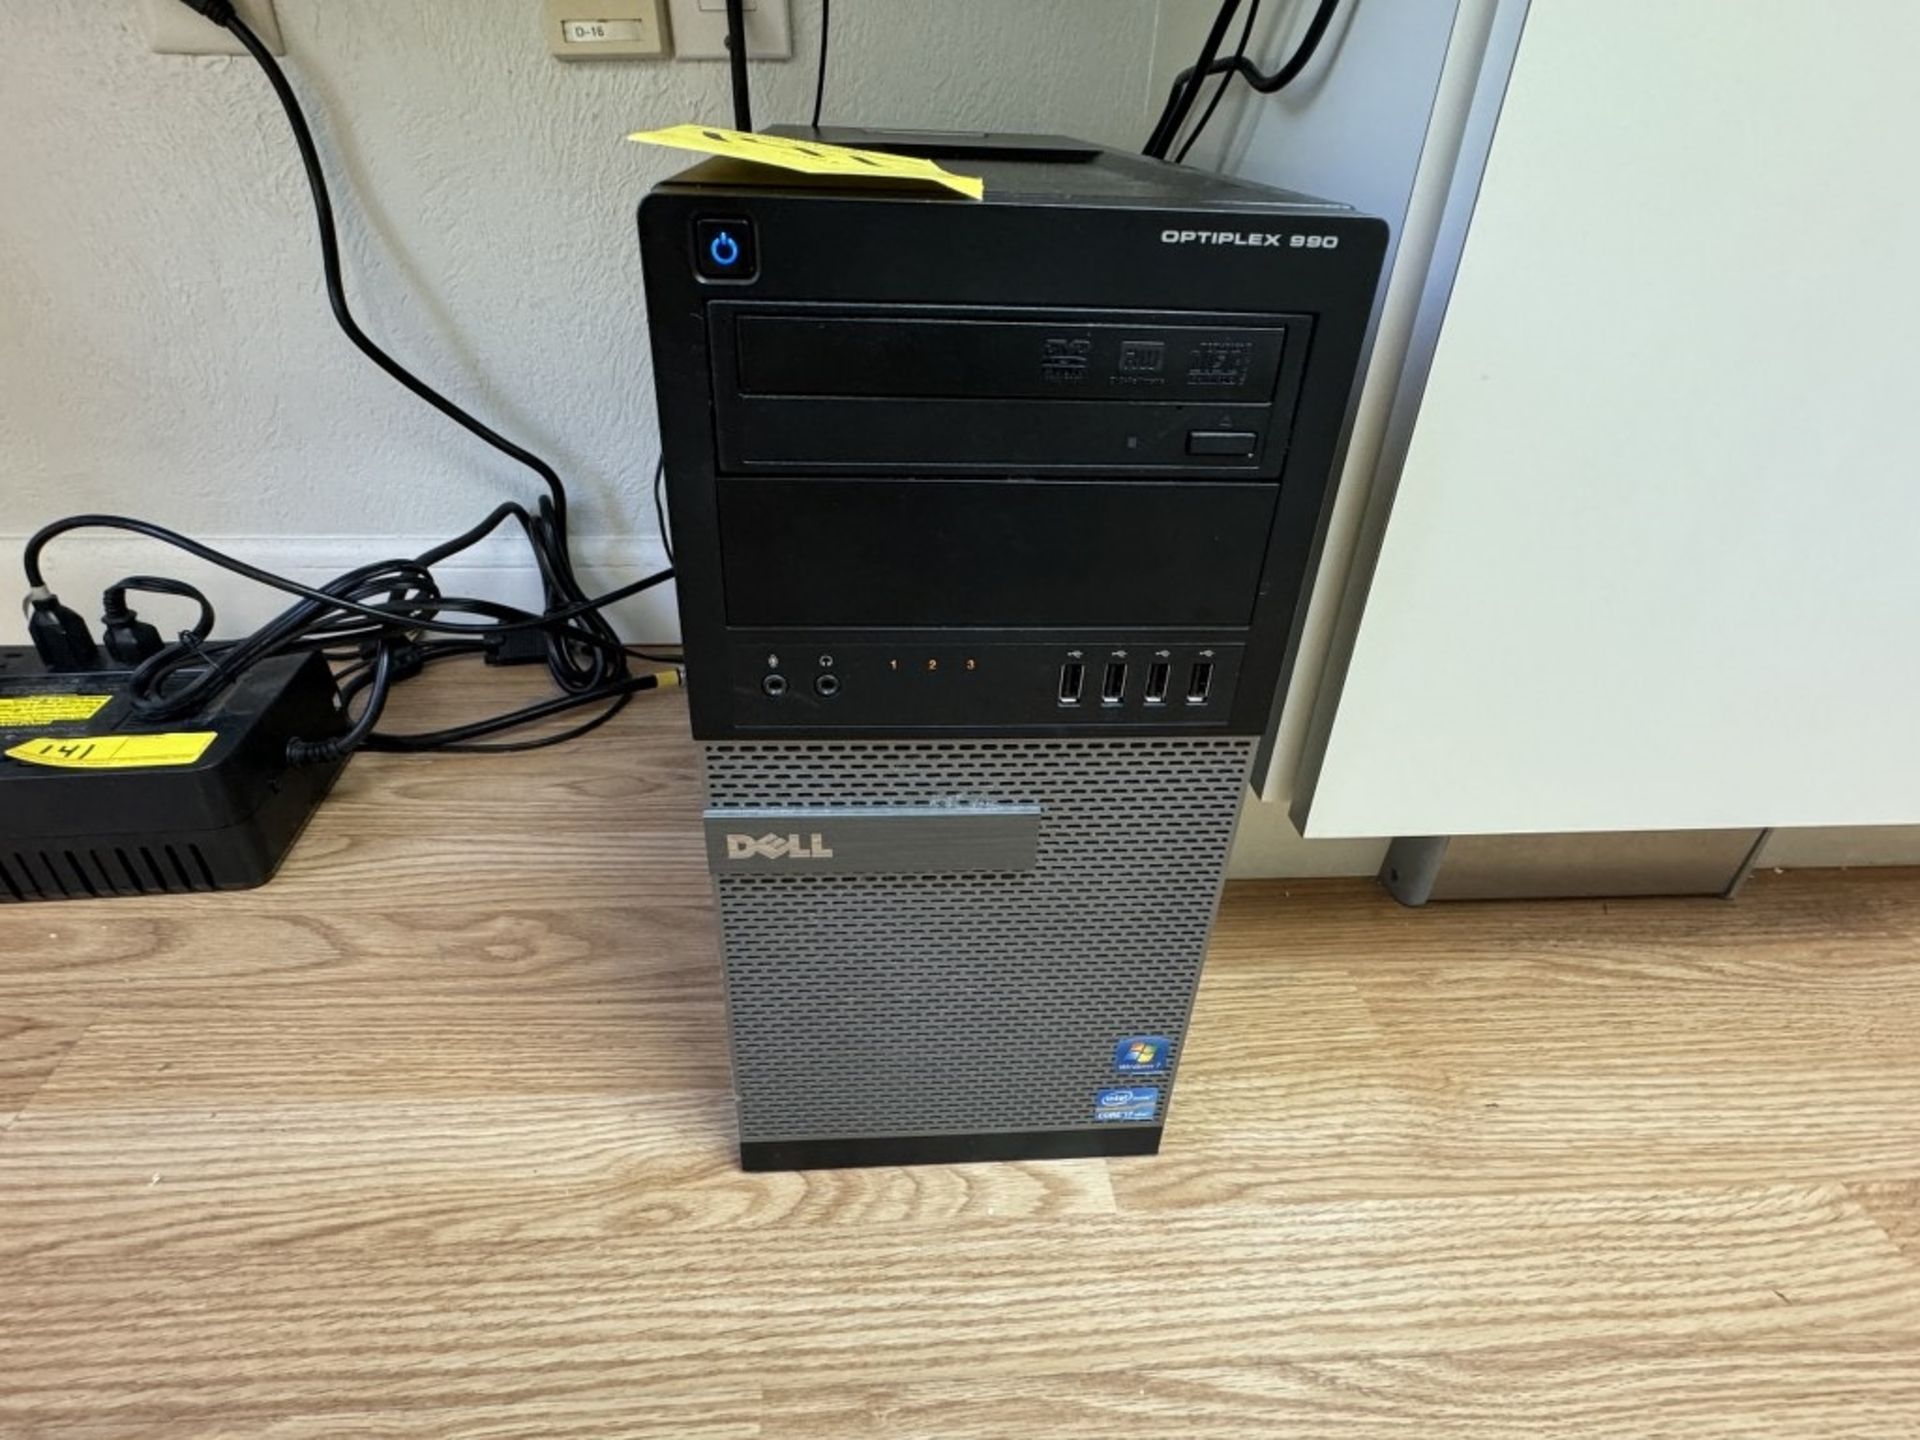 DELL OPTIPLEX 990 COMPUTER SYSTEM, CORE I7 VPRO - Image 2 of 6